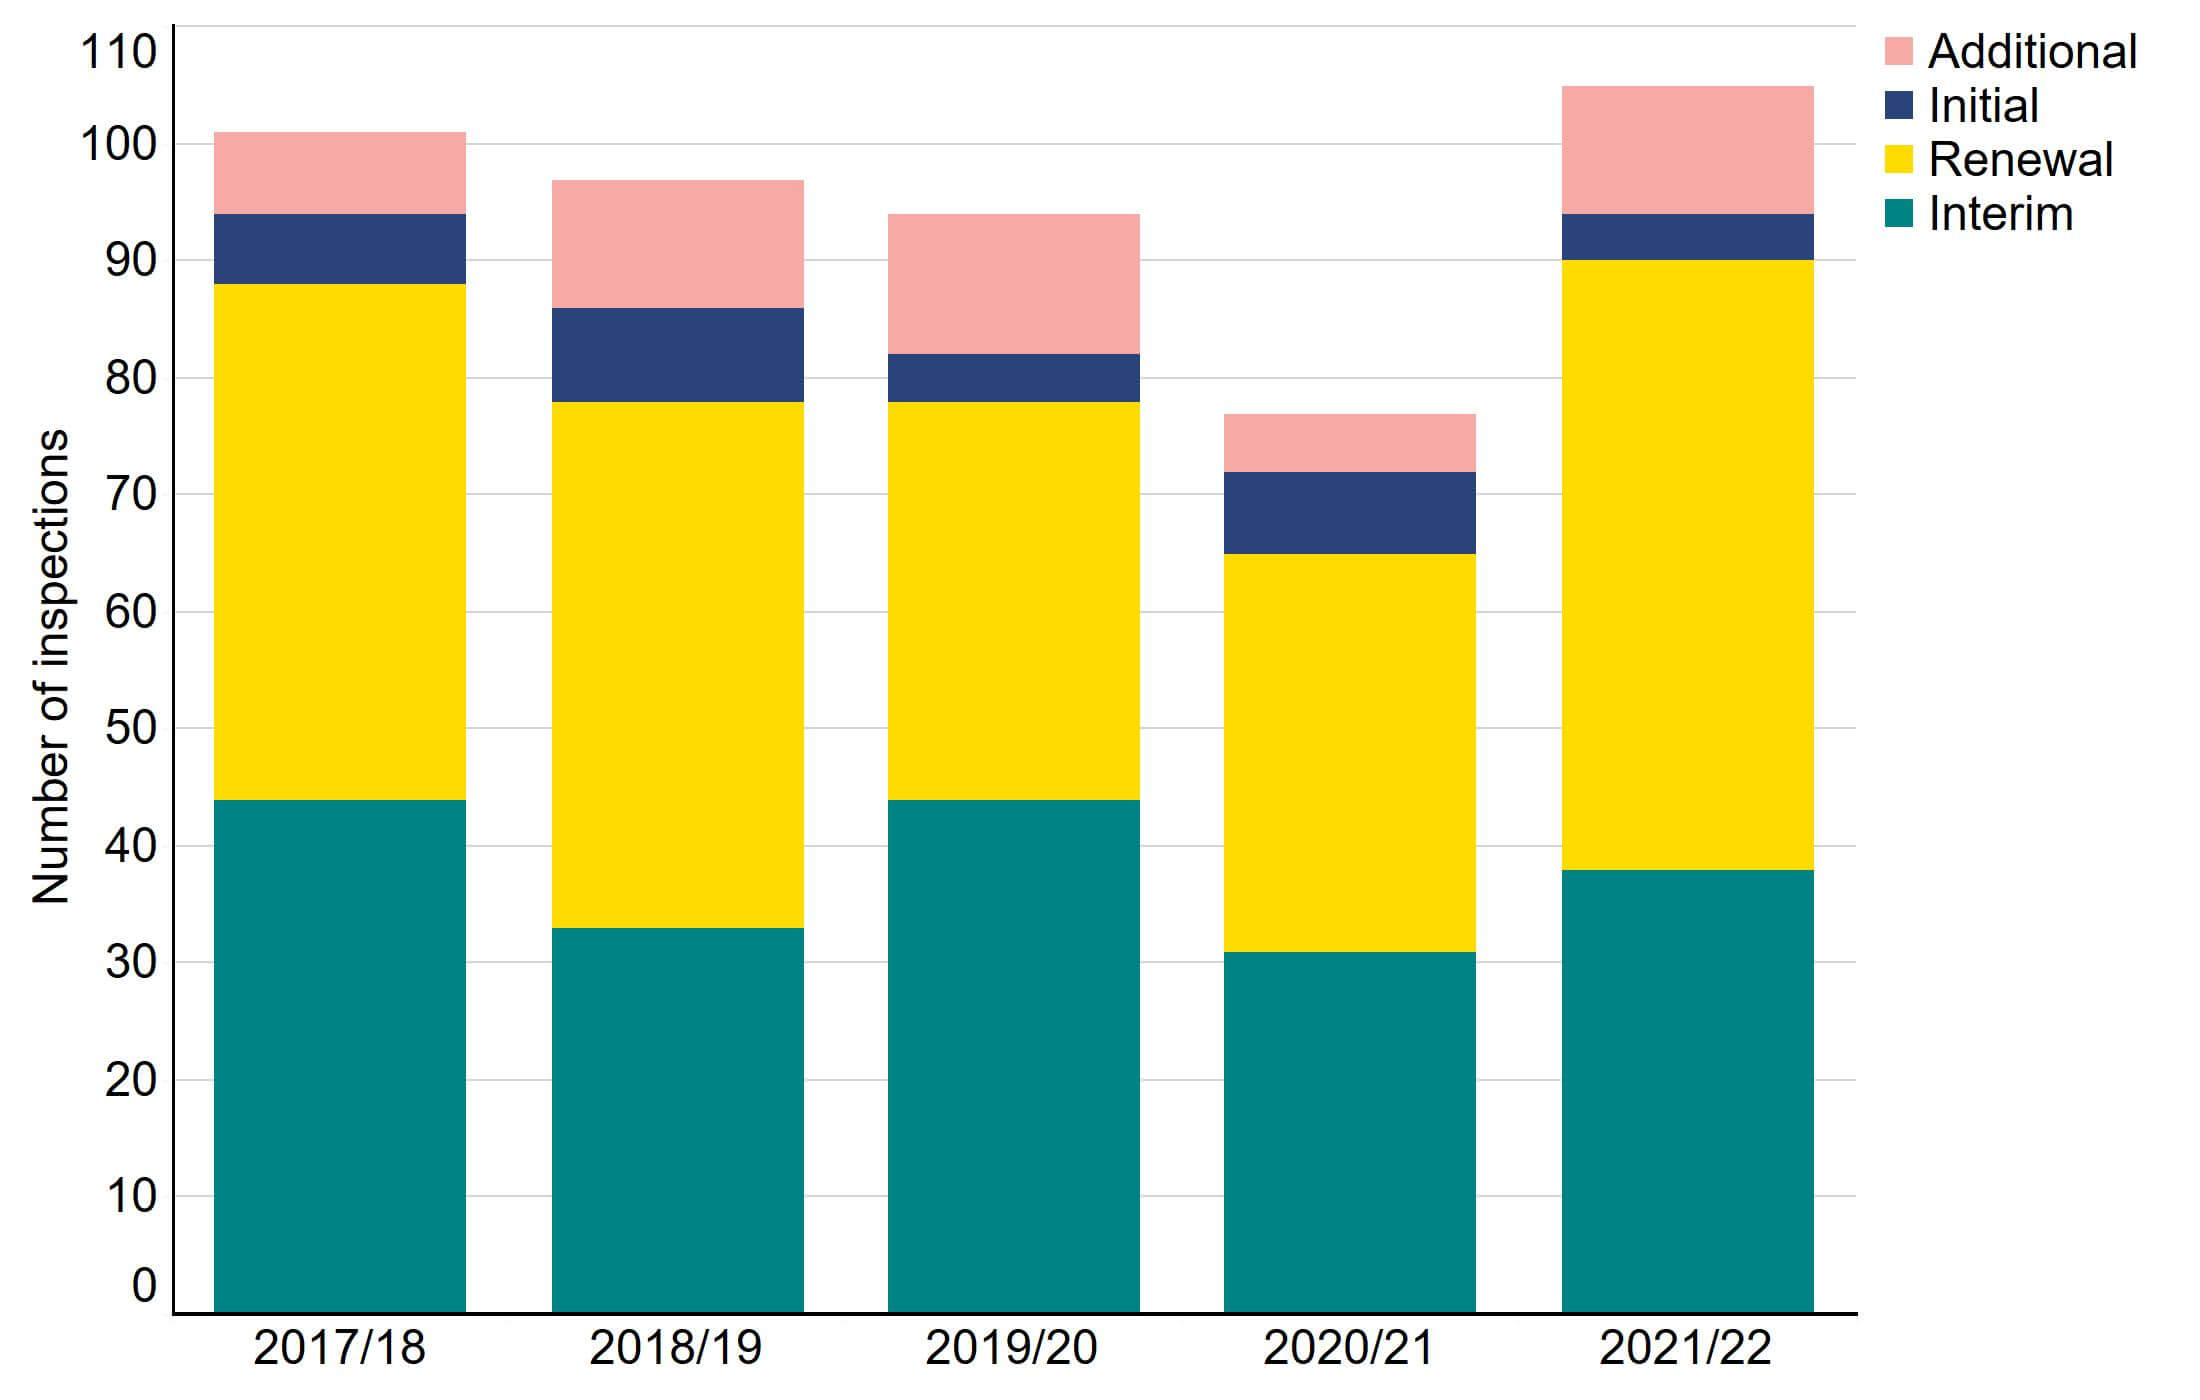 Figure 2: Number of inspections by type, 2017/18 – 2021/22. Number of inspections by type, 2017/18 – 2021/22. This stacked bar chart shows the number of inspections carried out each financial year 2017/18 to 2021/22, grouped by inspection type. In 2021/22, 52 inspections were renewals, 38 were interim, 11 were additional, 4 were initial. There were 105 inspections in 2021/22, an increase since 2020/21, due to the COVID-19 pandemic resulting in deferral of some inspections from 2020/21 to 2021/22. An accessible form of the underlying data for this figure can be downloaded at the start of the report in .xls format.